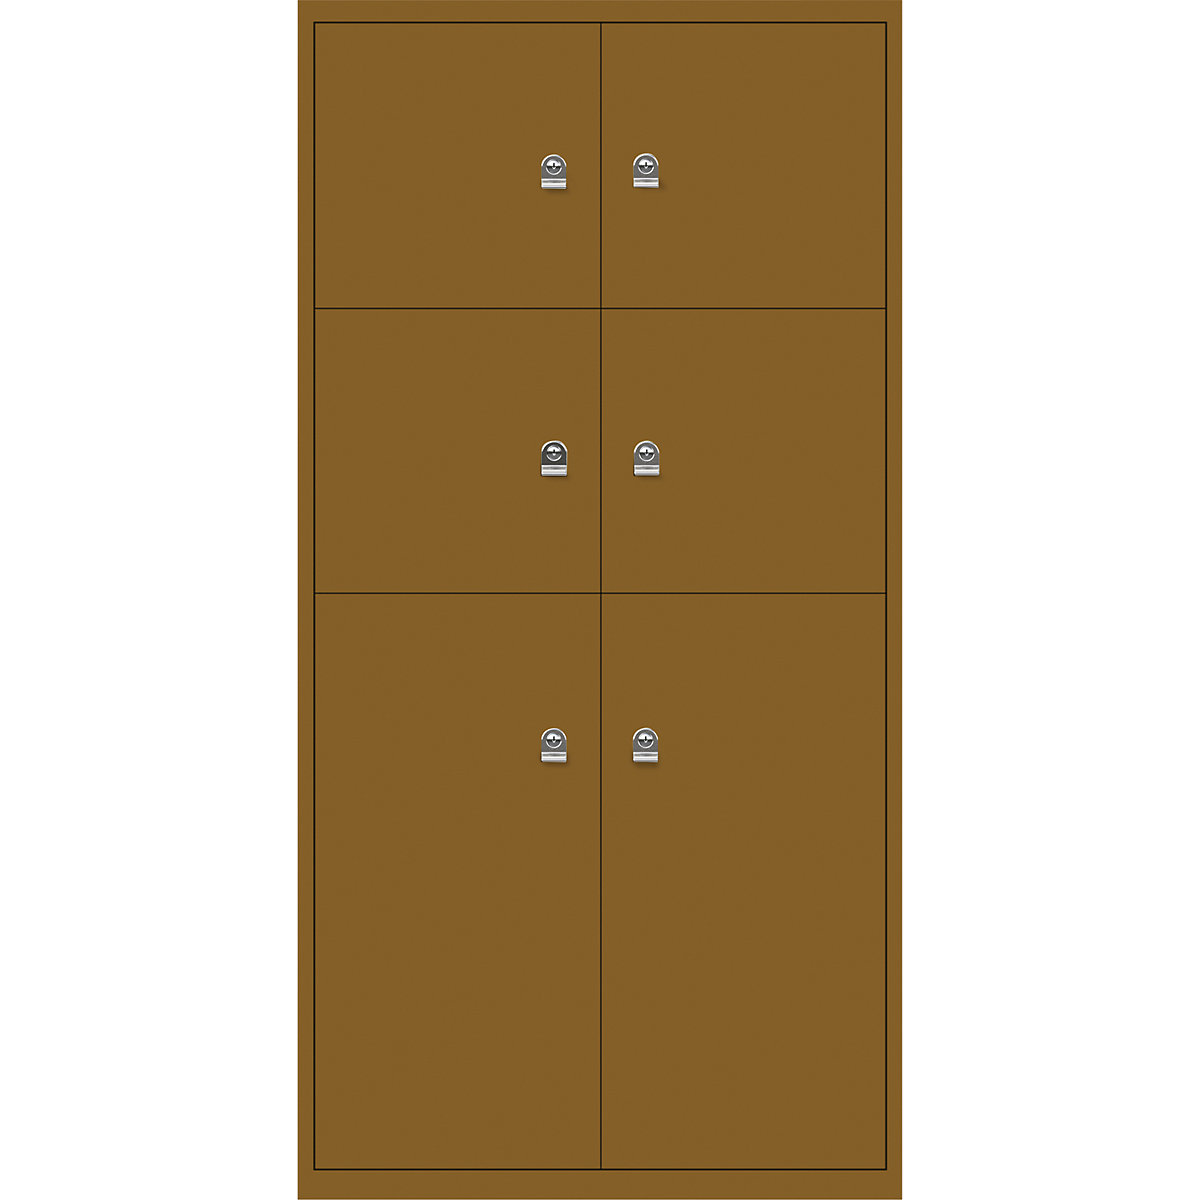 LateralFile™ lodge – BISLEY, with 6 lockable compartments, height 4 x 375 mm, 2 x 755 mm, dijon-26